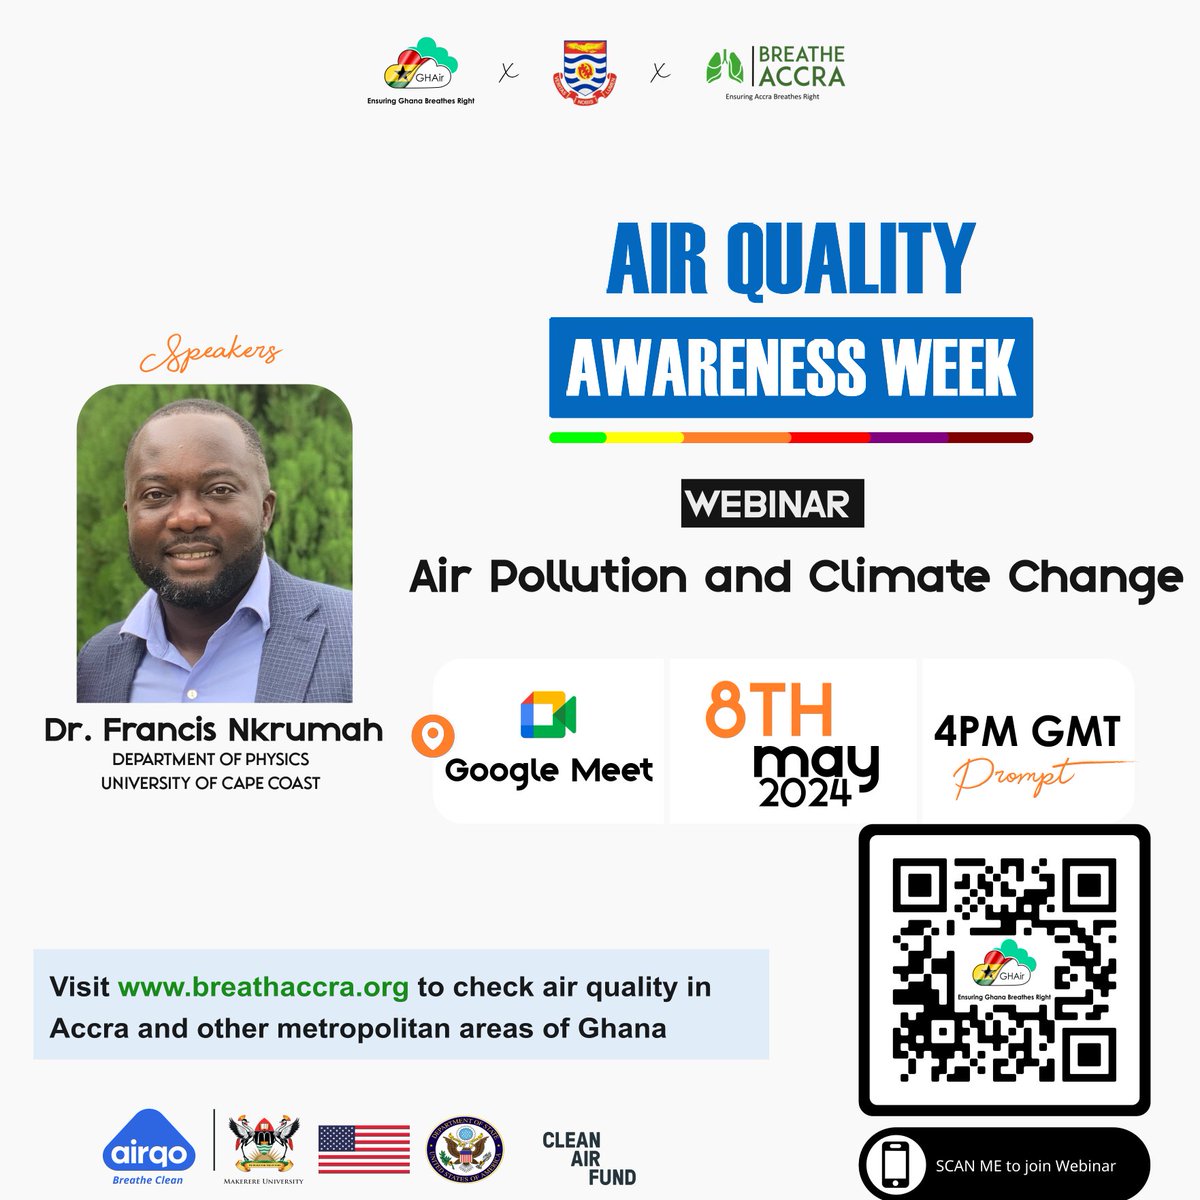 Join @ebo_climate as he speaks on air pollution and climate change at 4pm today. Be a part of the conversation to influence change as we get to know our air. #CleanAir for all remains our aim. #AQAW2024 #ClimateChange #BreatheAccra